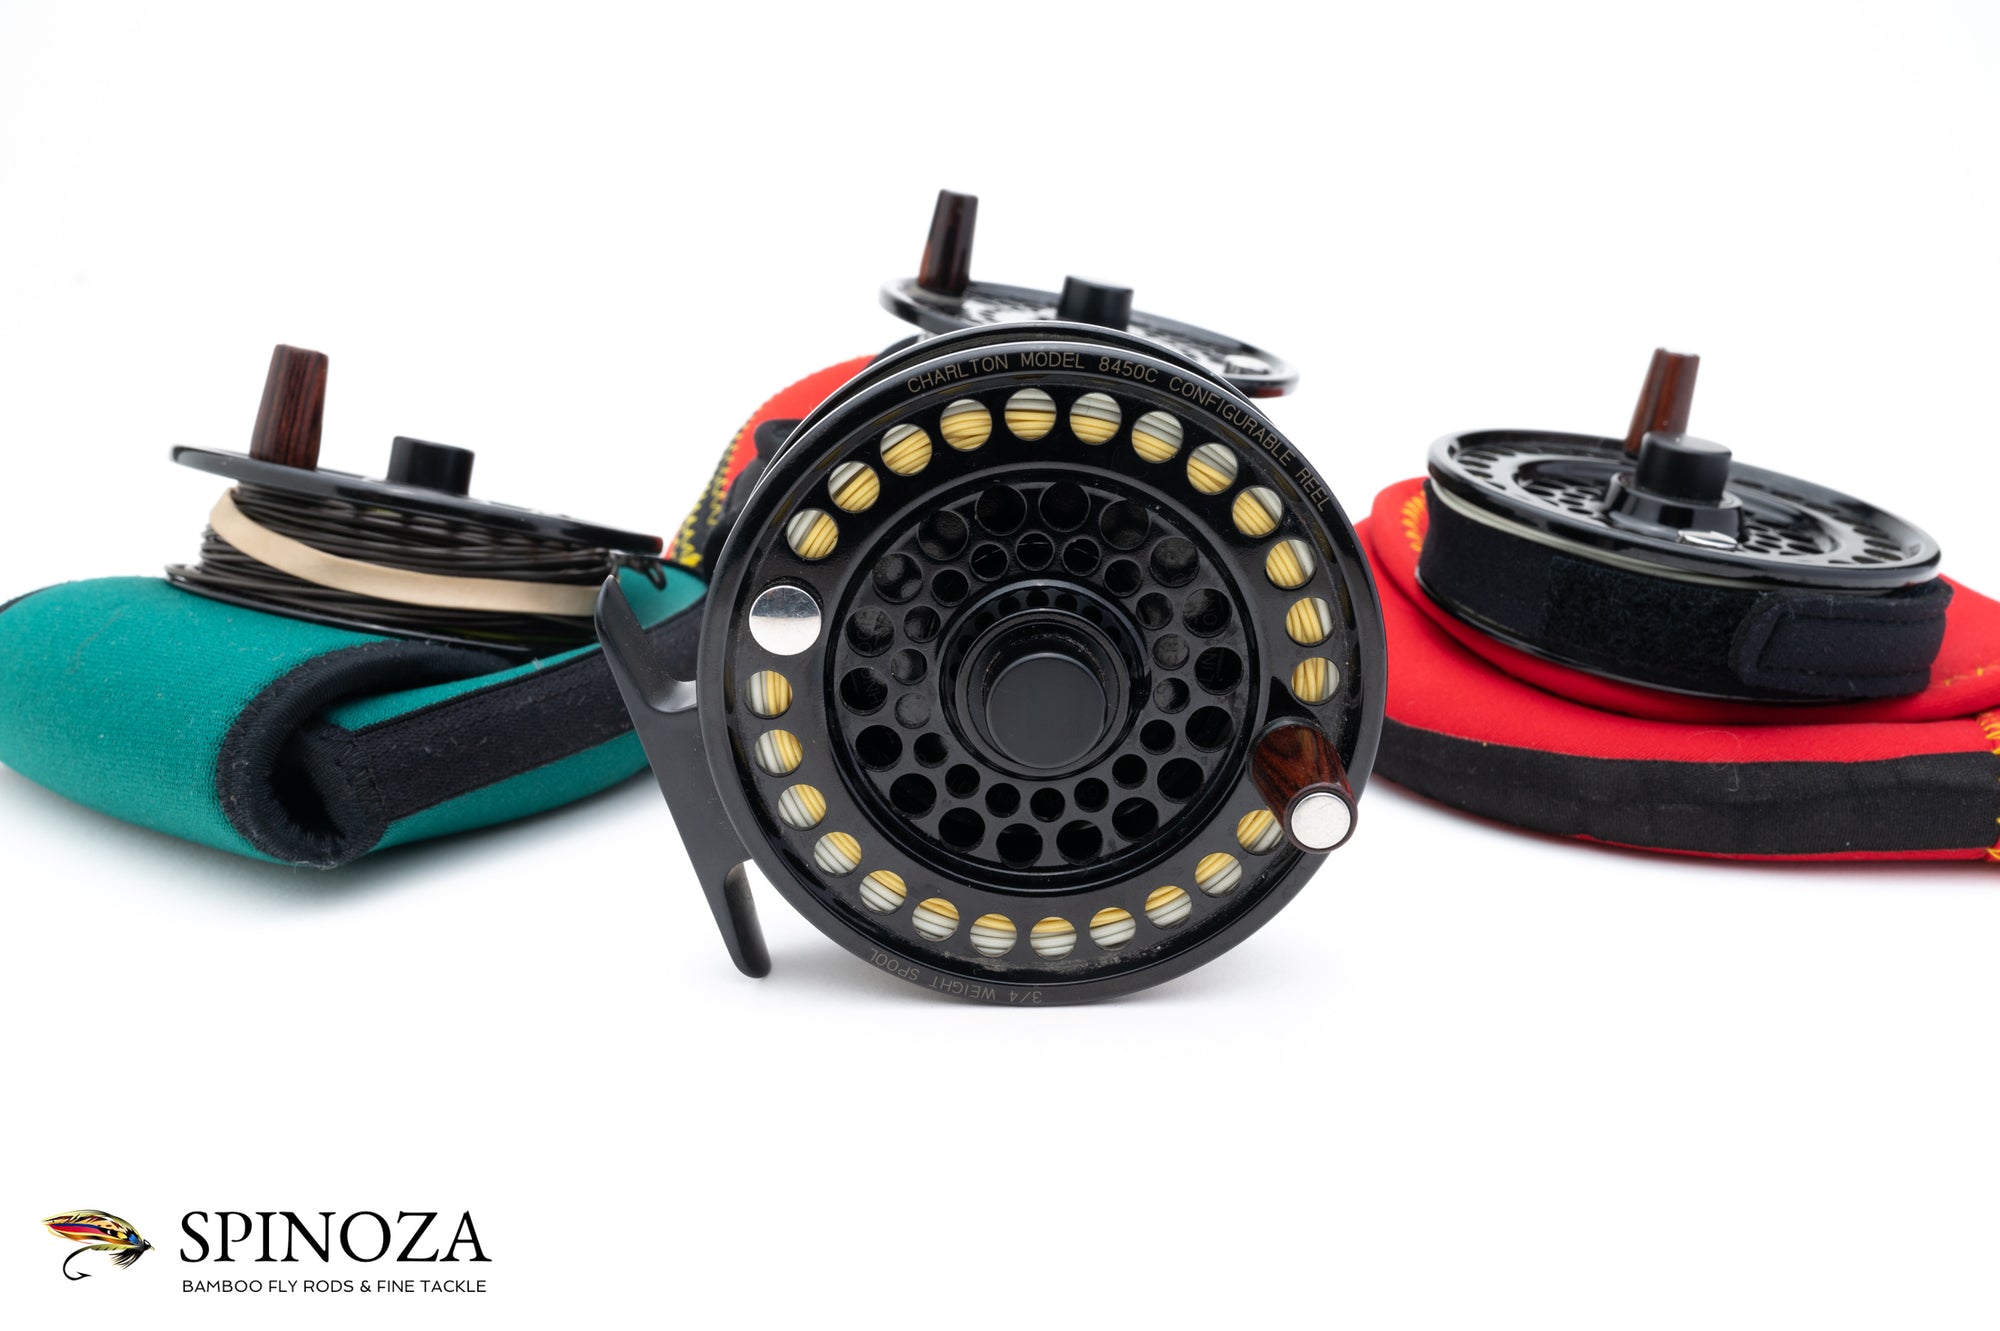 Charlton 8450C Fly Reel with Four Spools